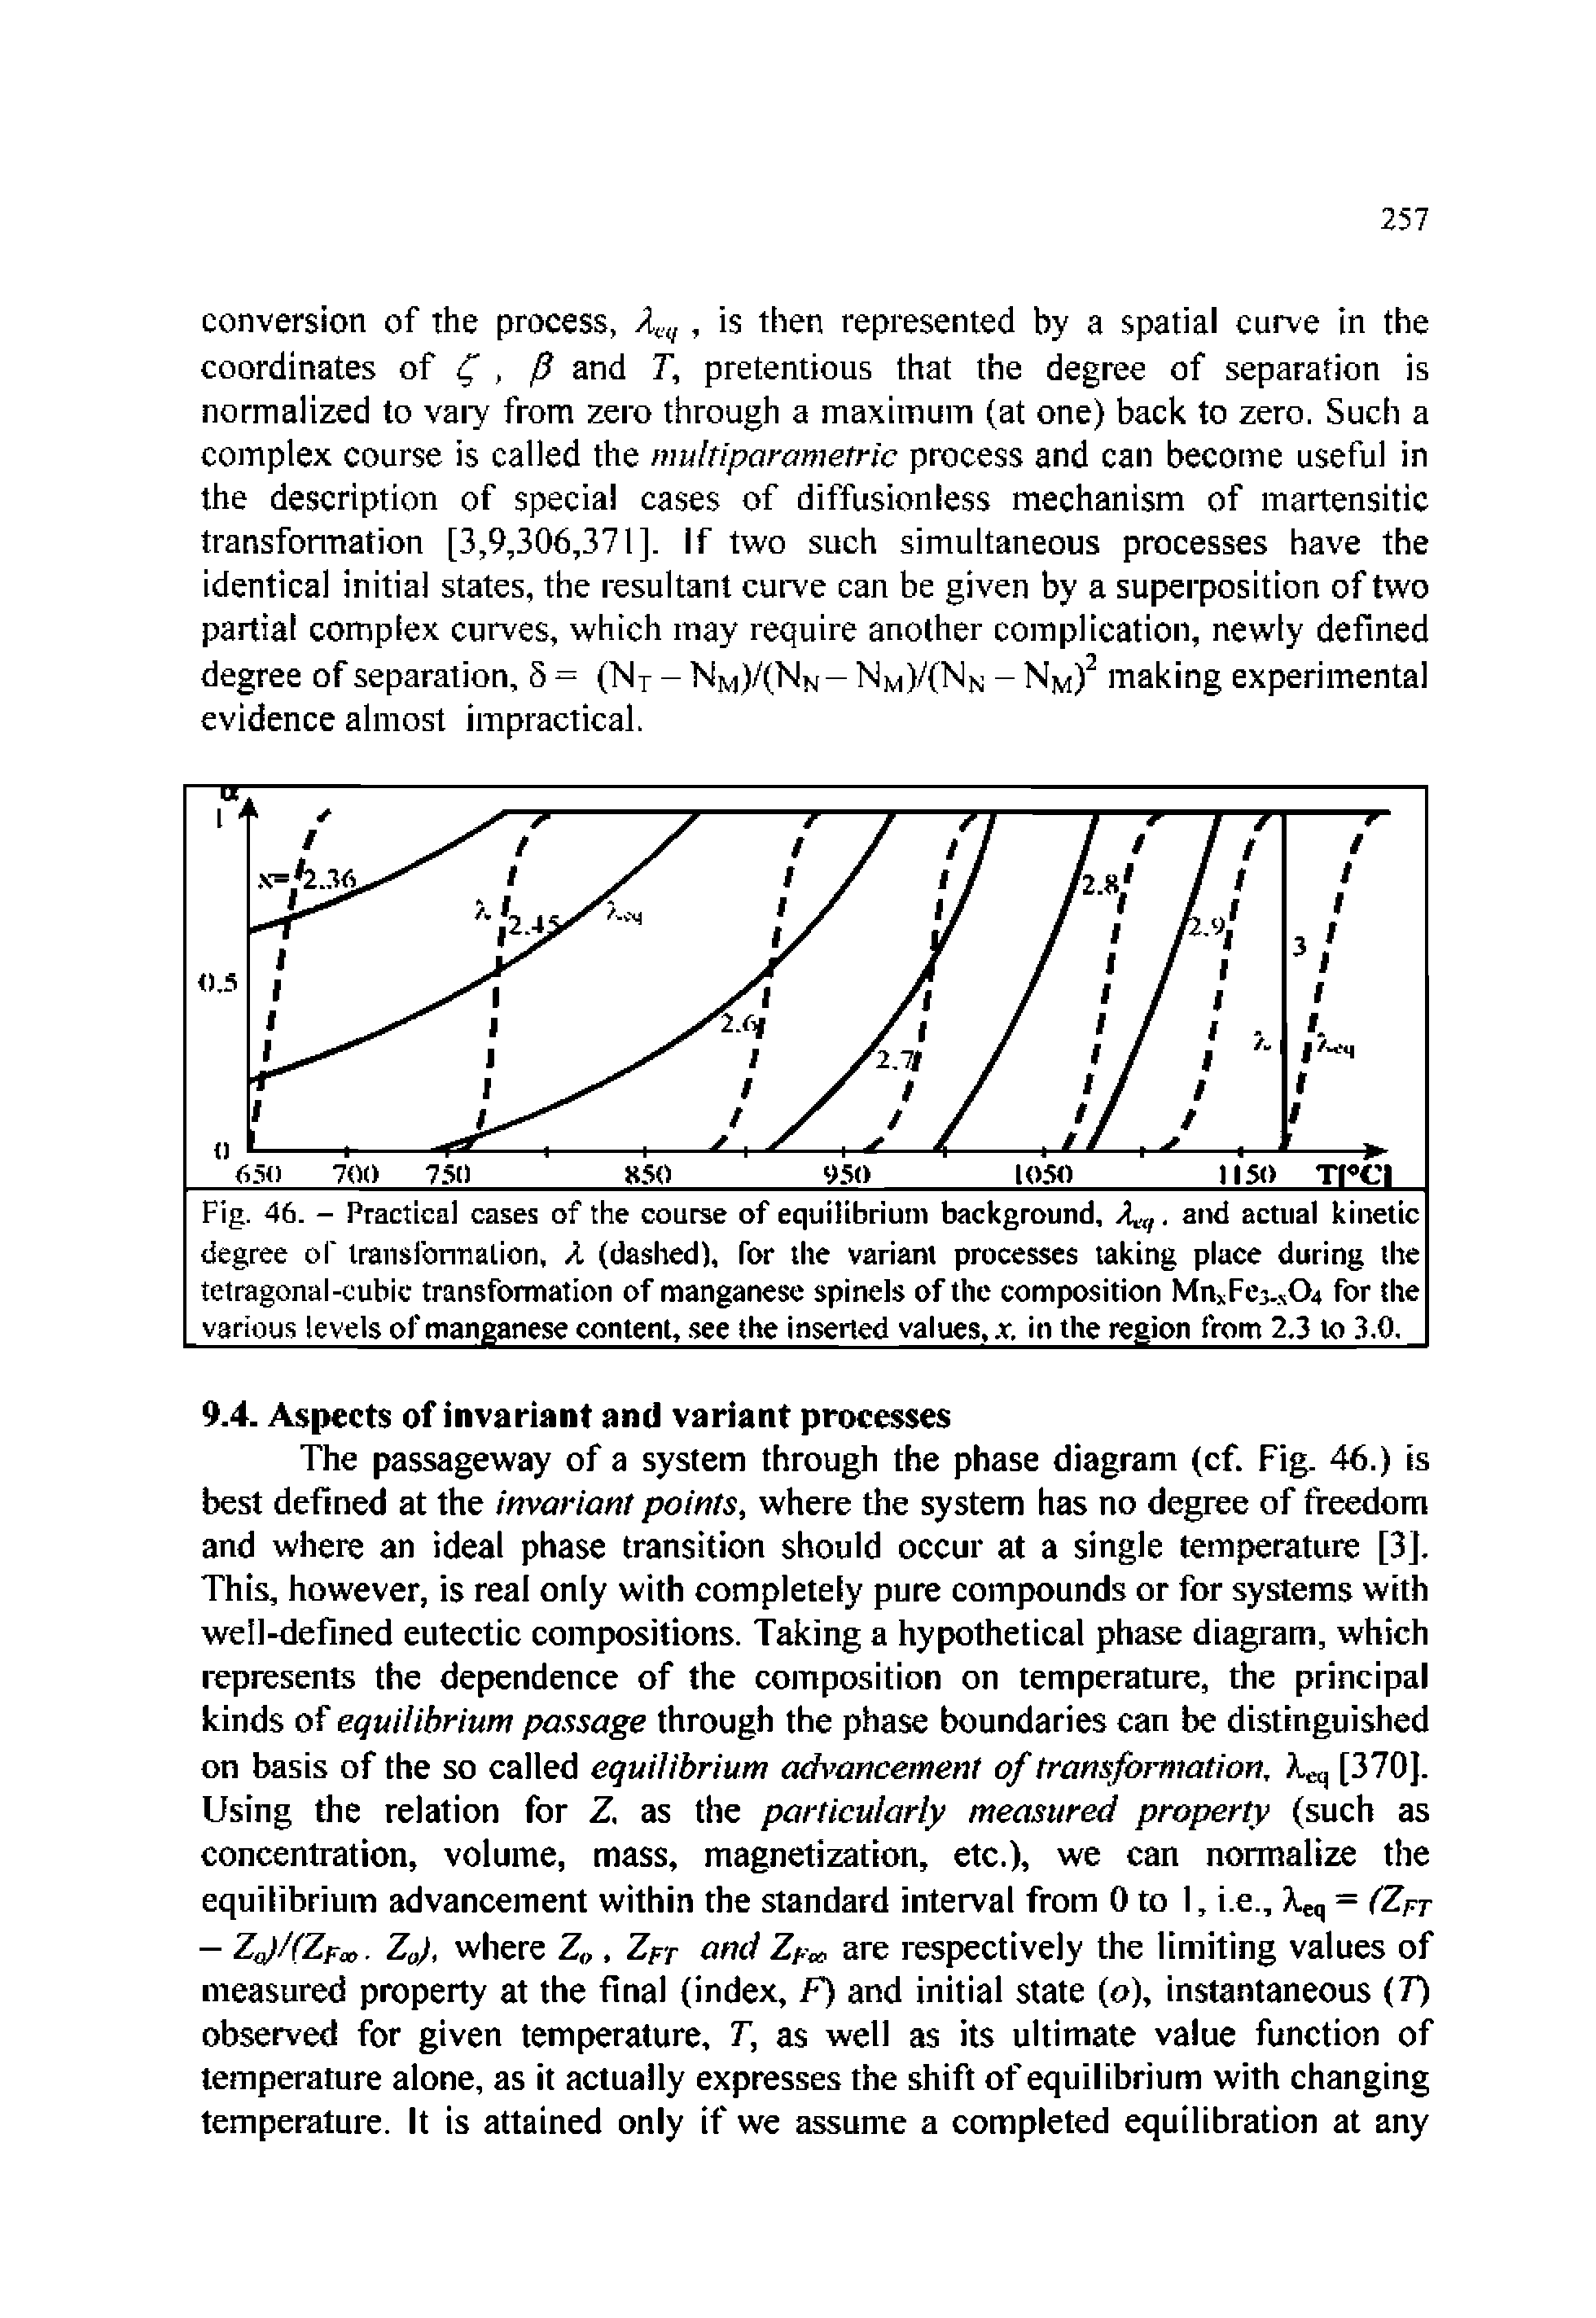 Fig. 46. - Practical cases of the course of equilibrium background, Xa,. and actual kinetic degree of traiisformalion, A (dashed), for the variant processes taking place during the tetragonal-cubic transformation of manganese spinels of the composition MnxFe3-s04 for the various levels of manganese content, see the inserted values,. t. in the region from 2.3 to 3.0.